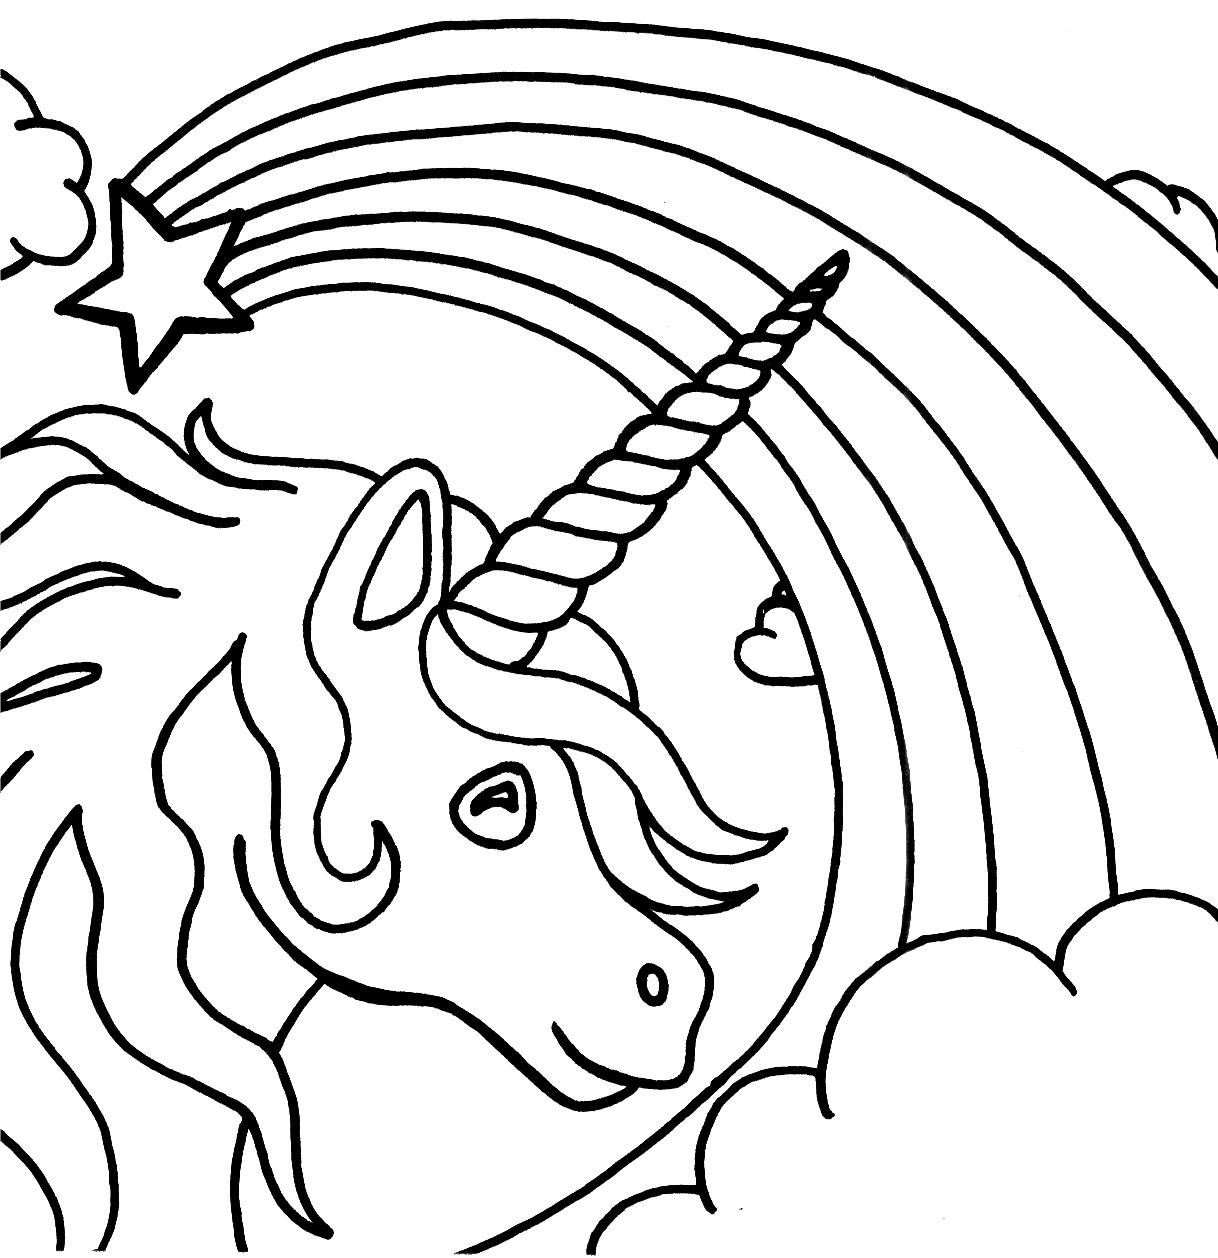 Cute Unicorn Coloring Pages For Kids
 Free Printable Unicorn Coloring Pages For Kids